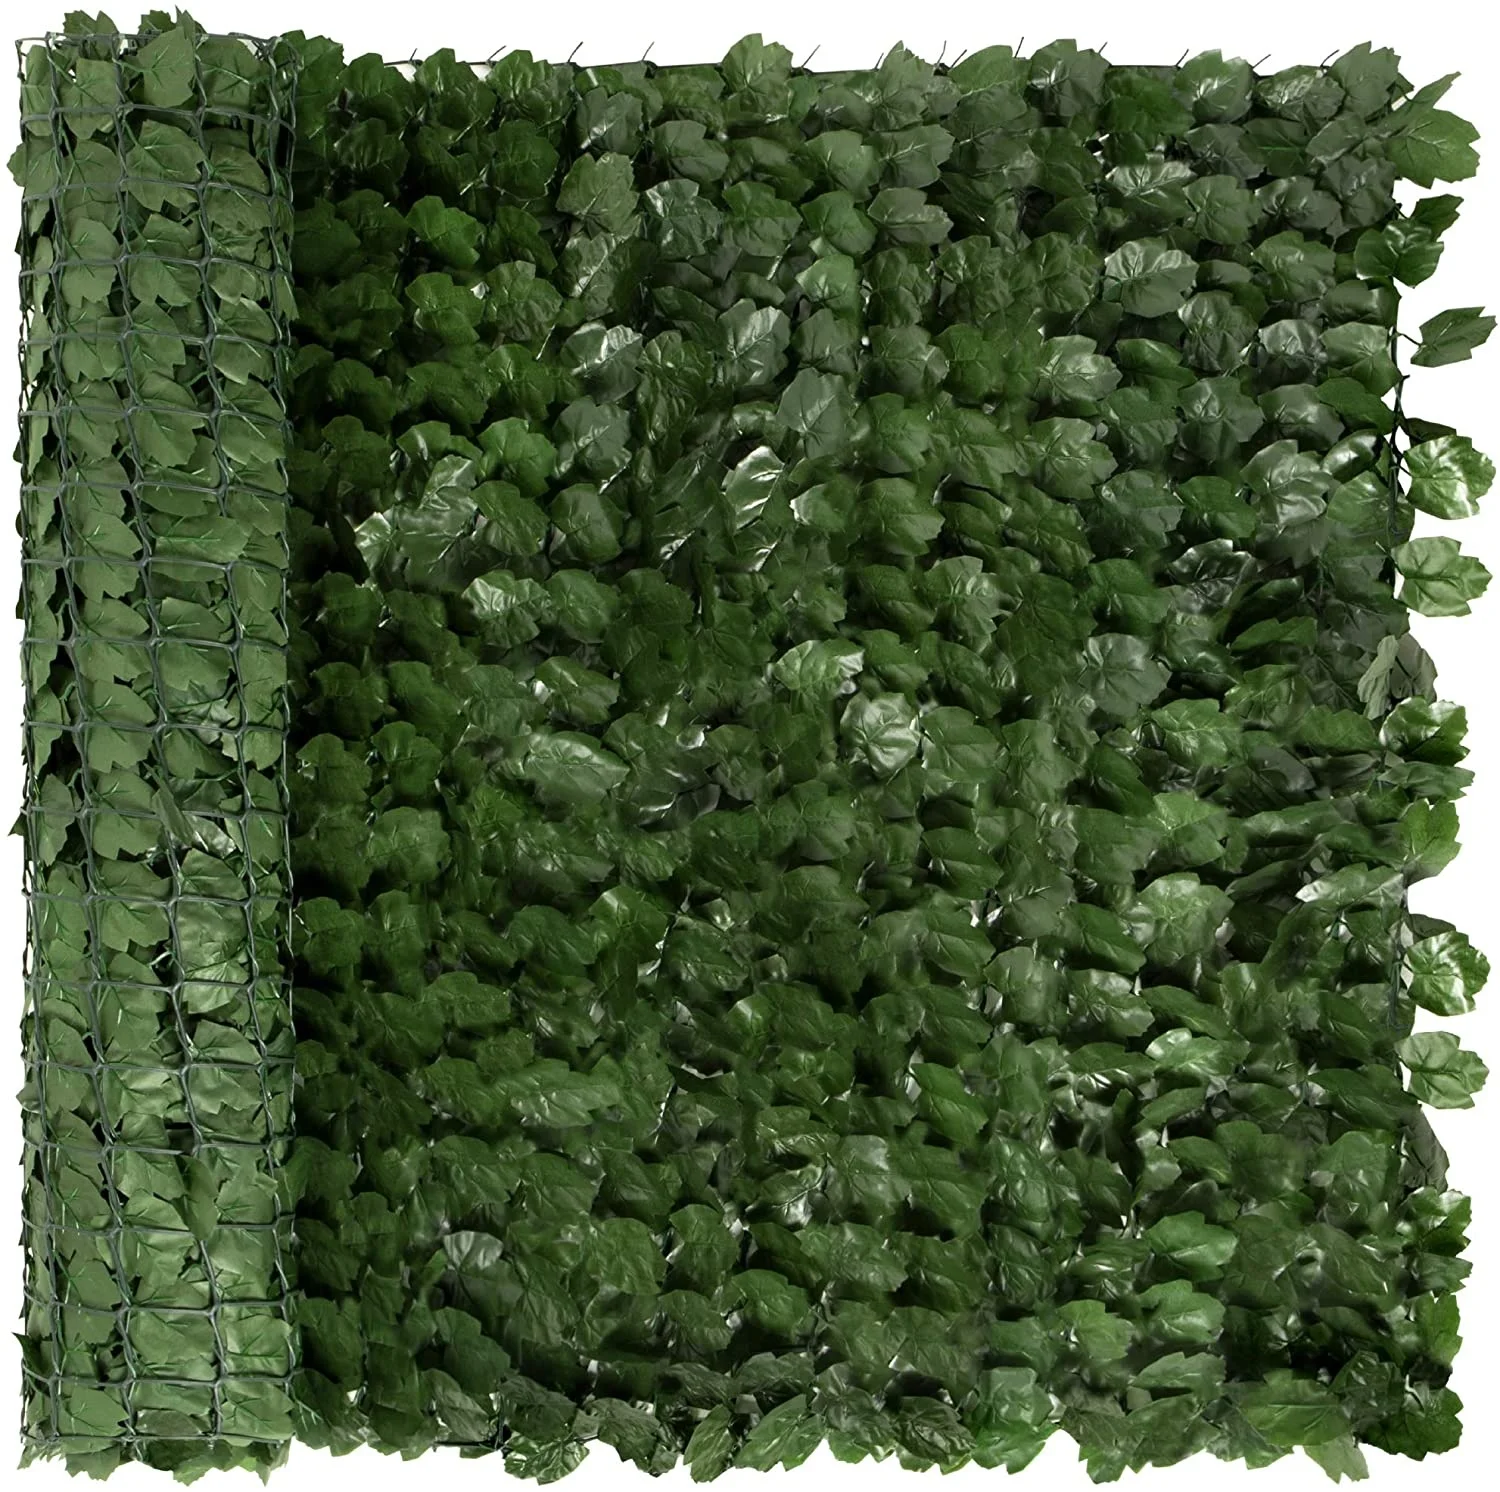 

1x3M Artificial Leaf Hedge Screen Privacy Wall Cover for Garden Outdoor Indoor Backyard Decor Artificial Plants Fence Screening